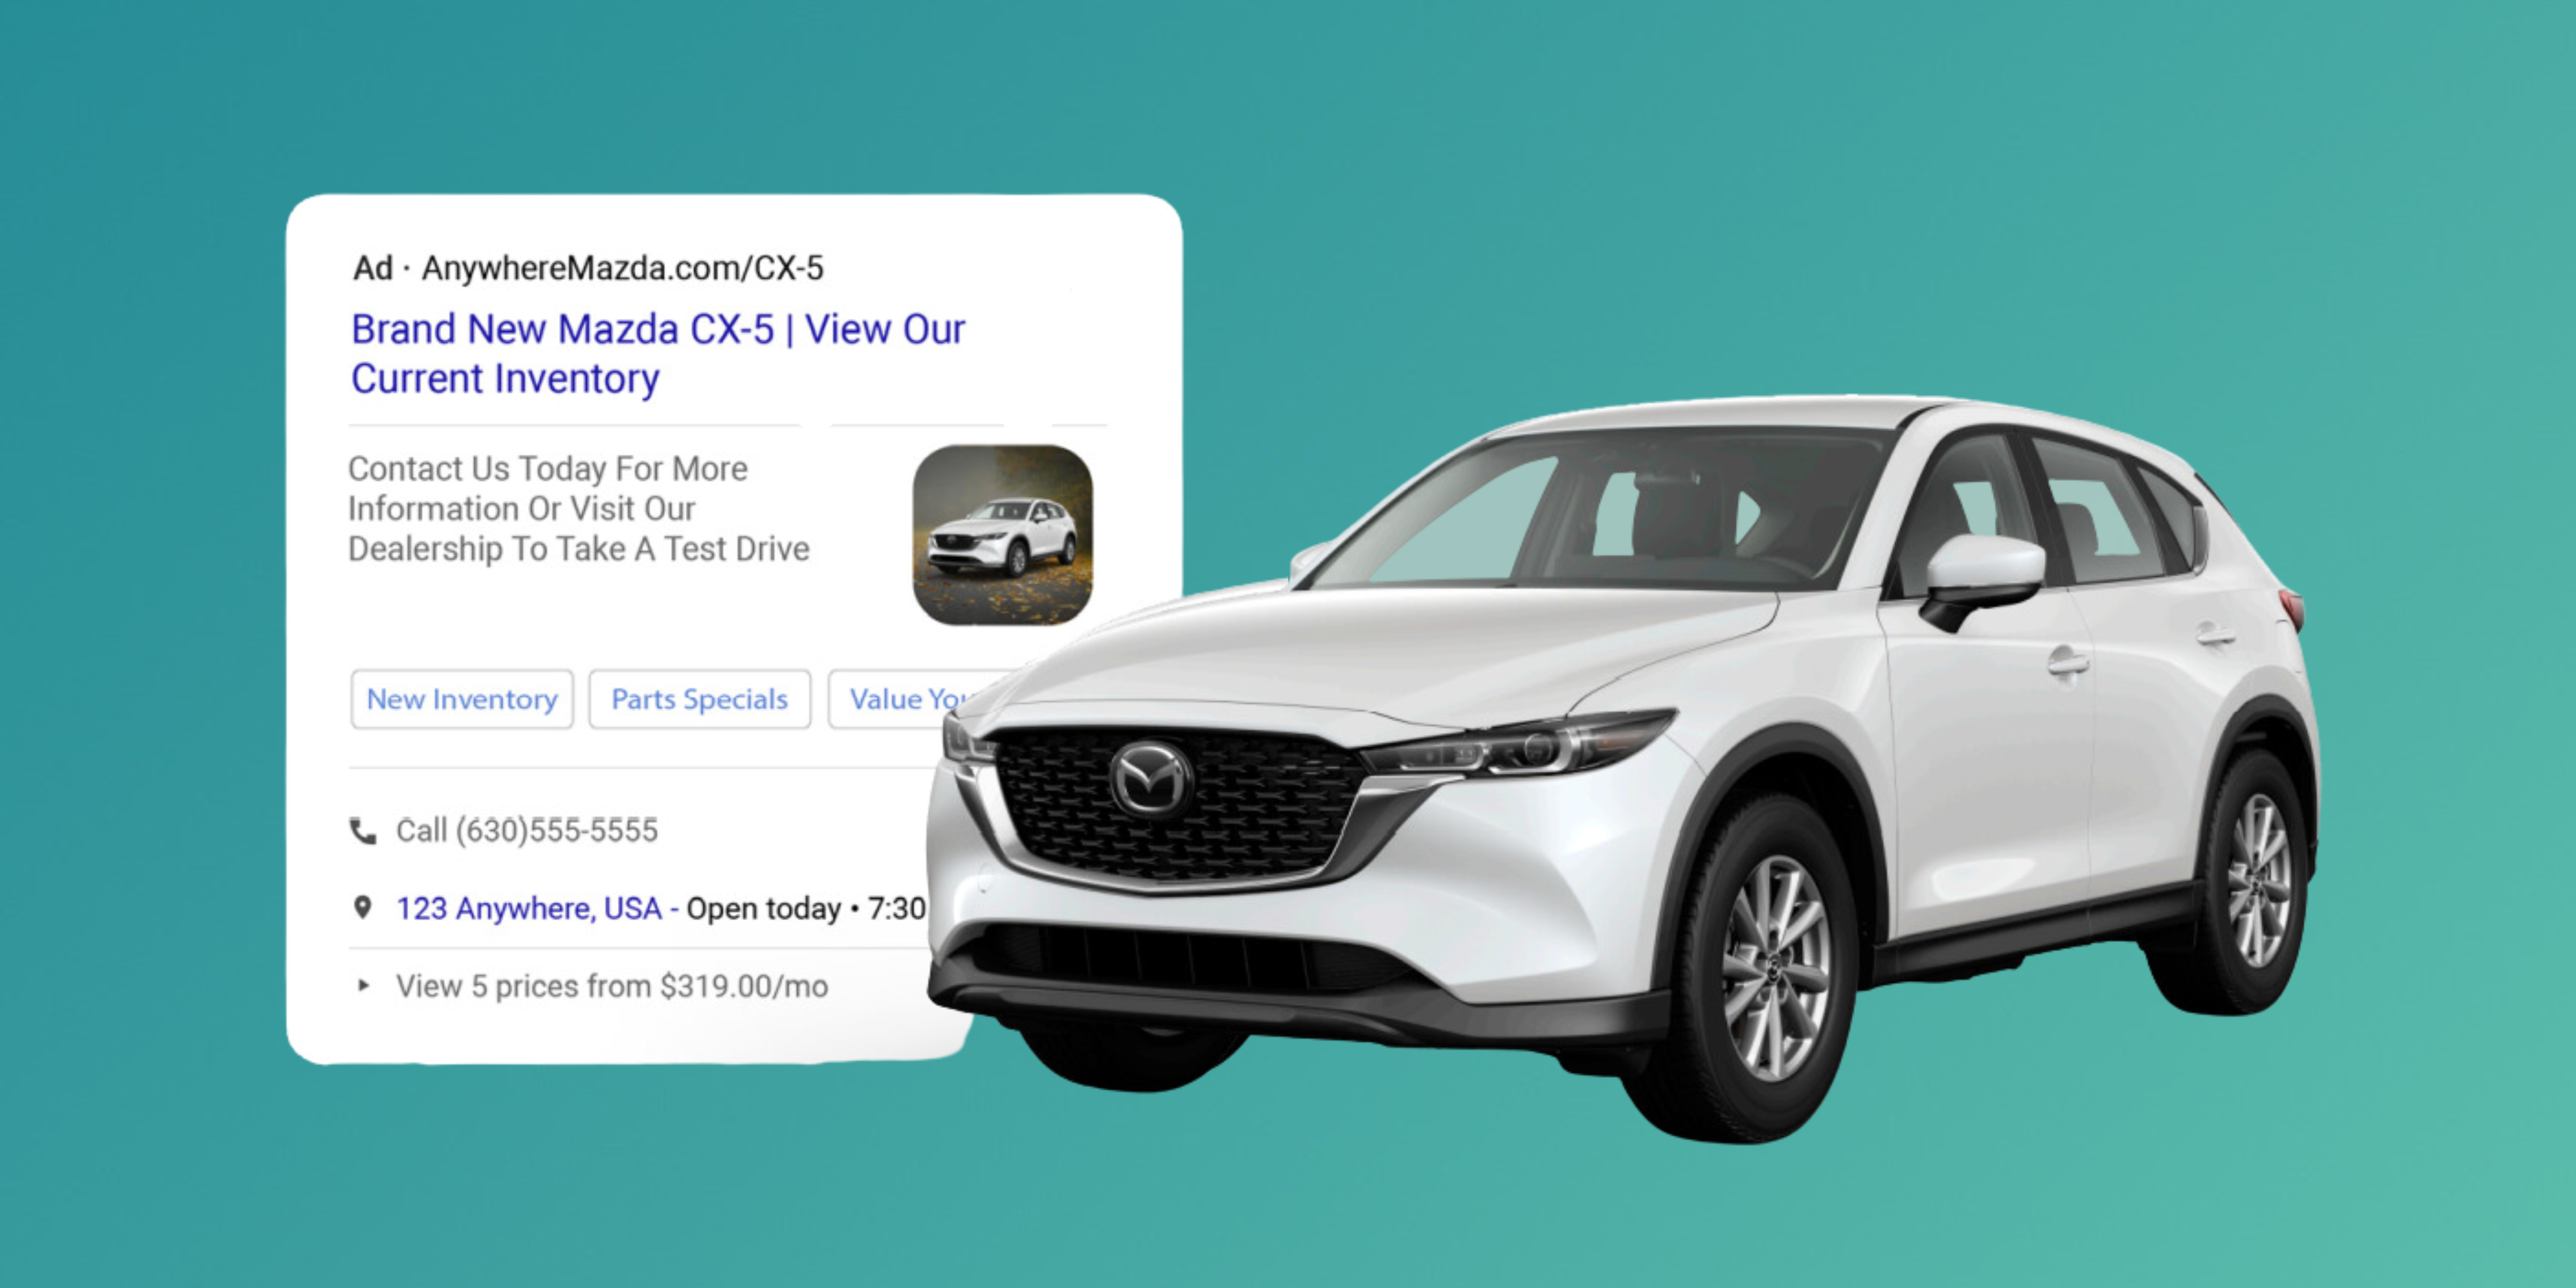 Mazda’s Refined Digital Strategy: Accelerating The Market